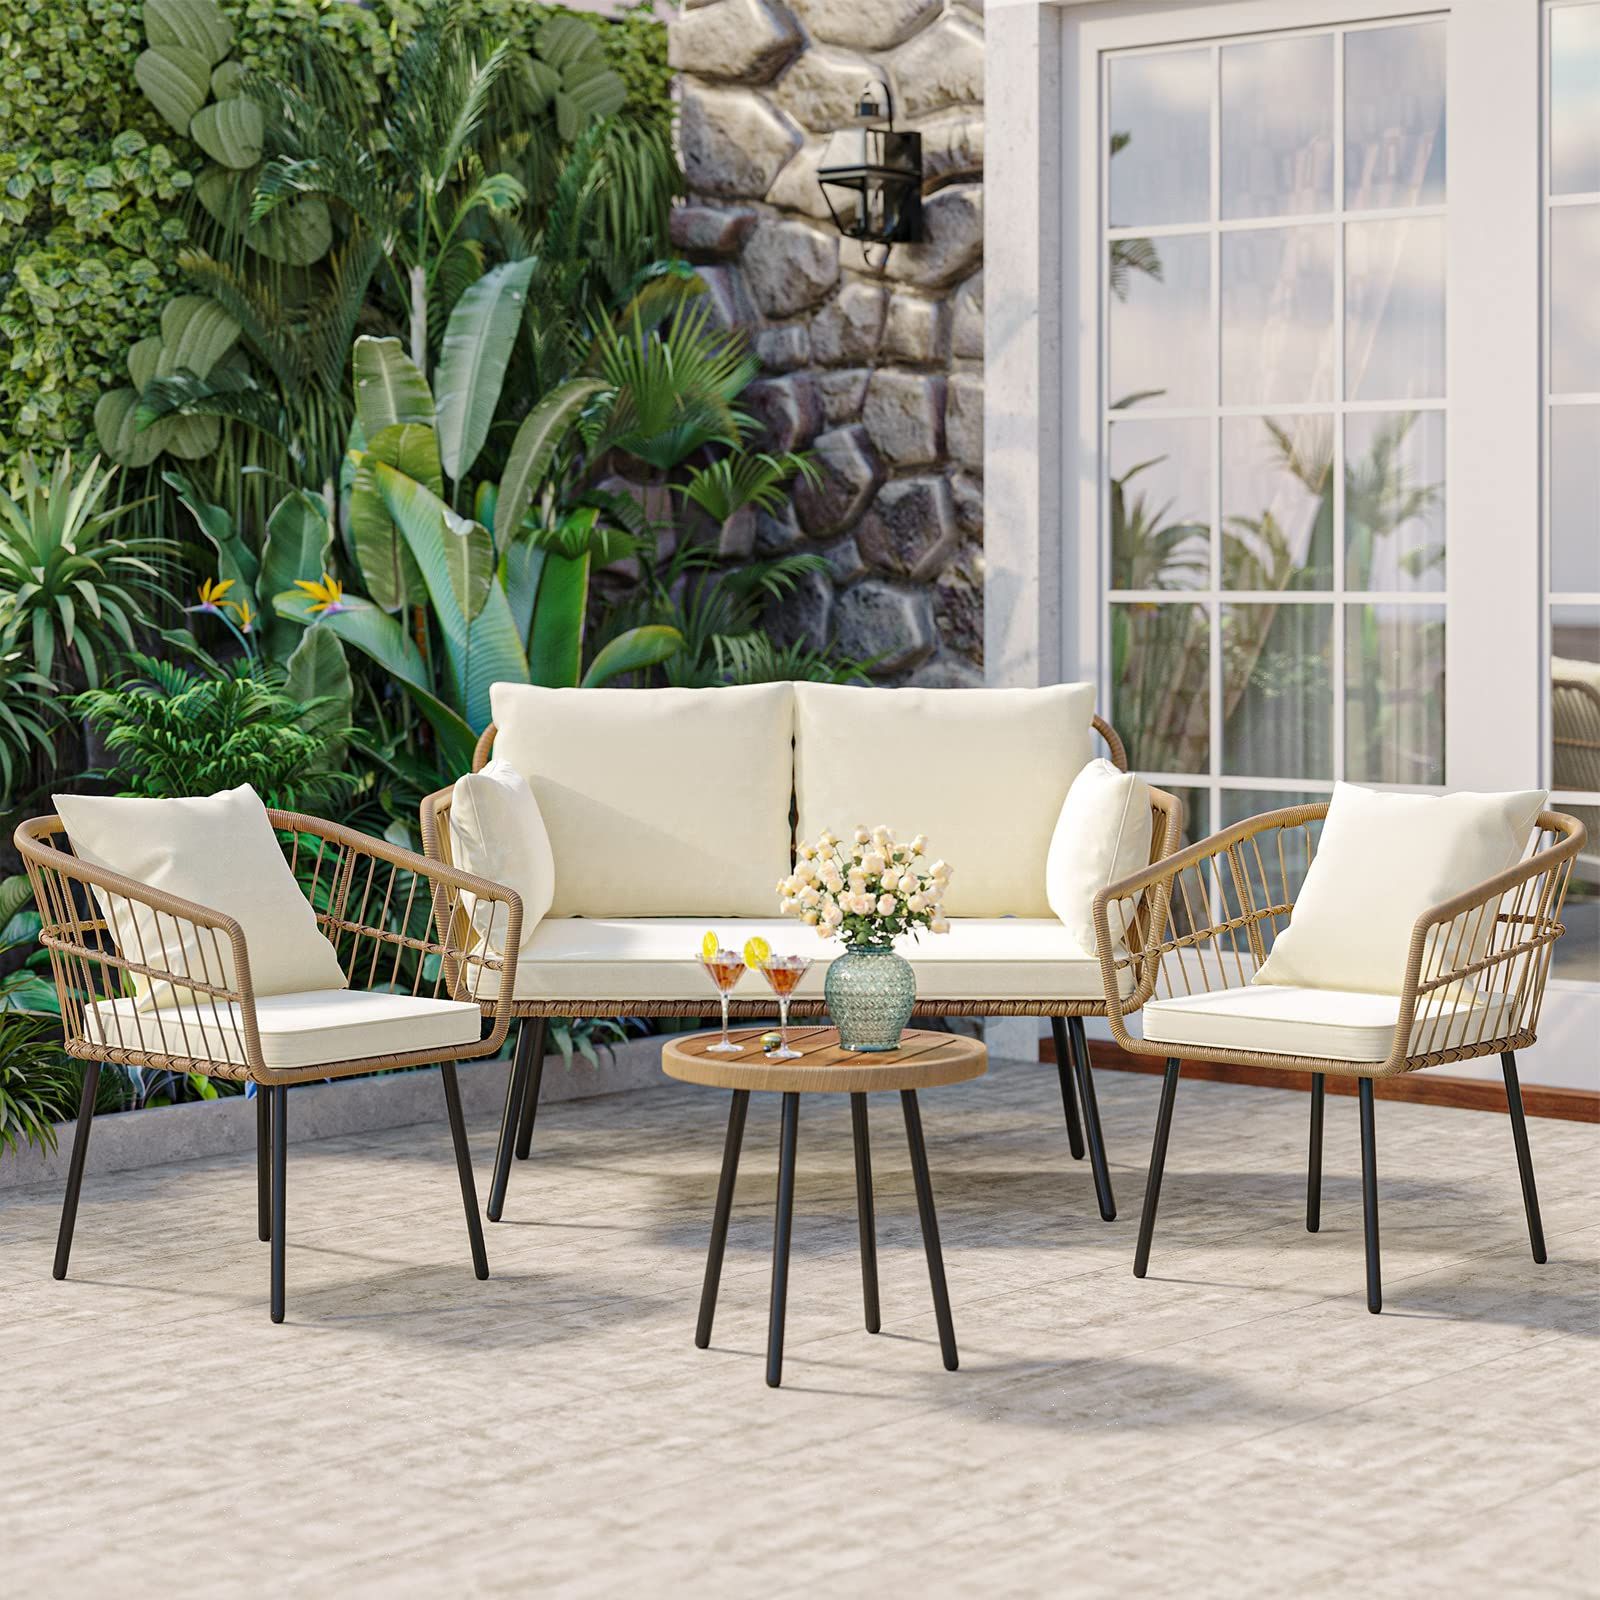 Amazon: Yitahome 4 Pieces Patio Furniture Set, Wicker Balcony Bistro  Set, Outdoor All Weather Rattan Conversation Set With Loveseat Chairs Table  Soft Cushions For Backyard, Pool, Deck, Garden – Beige : Patio, Lawn Throughout Current Loveseat Chairs For Backyard (View 4 of 15)